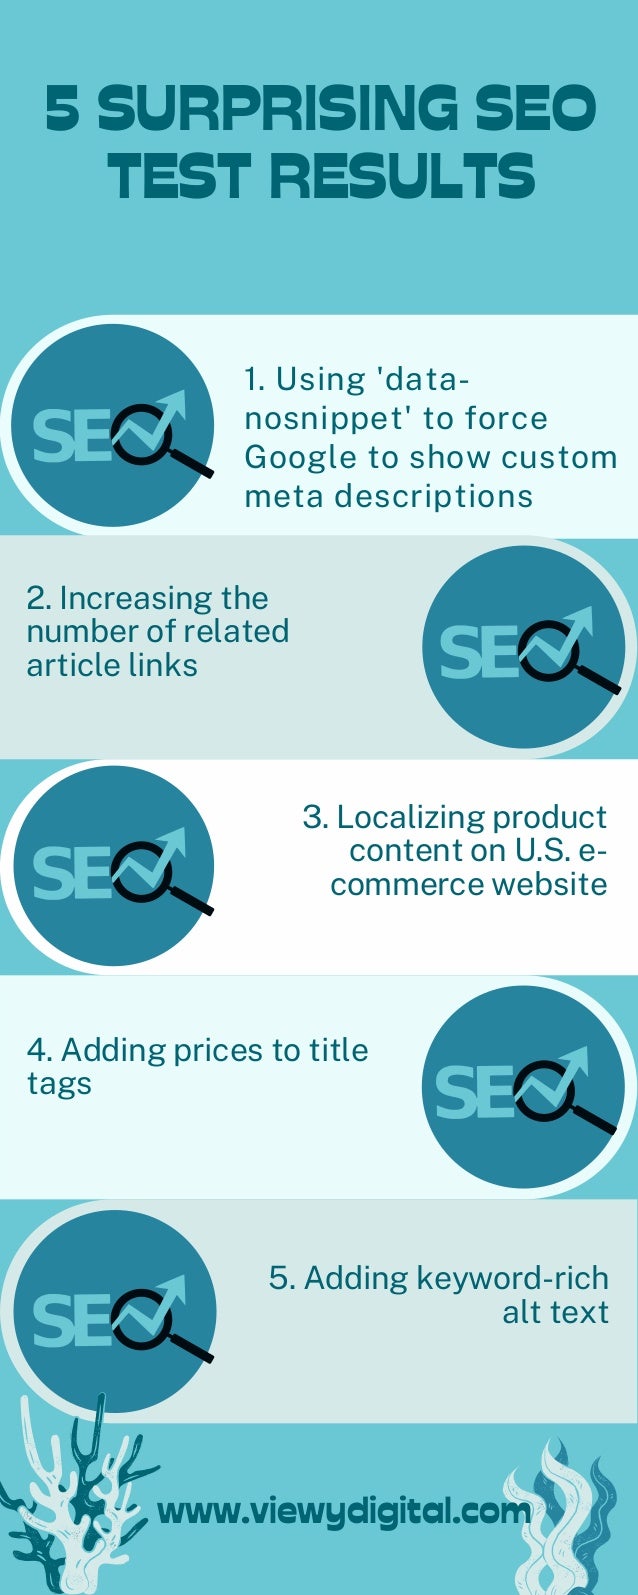 5 SURPRISING SEO
TEST RESULTS


www.viewydigital.com
1. Using 'data-
nosnippet' to force
Google to show custom
meta descriptions
3. Localizing product
content on U.S. e-
commerce website


2. Increasing the
number of related
article links
5. Adding keyword-rich
alt text


4. Adding prices to title
tags
 